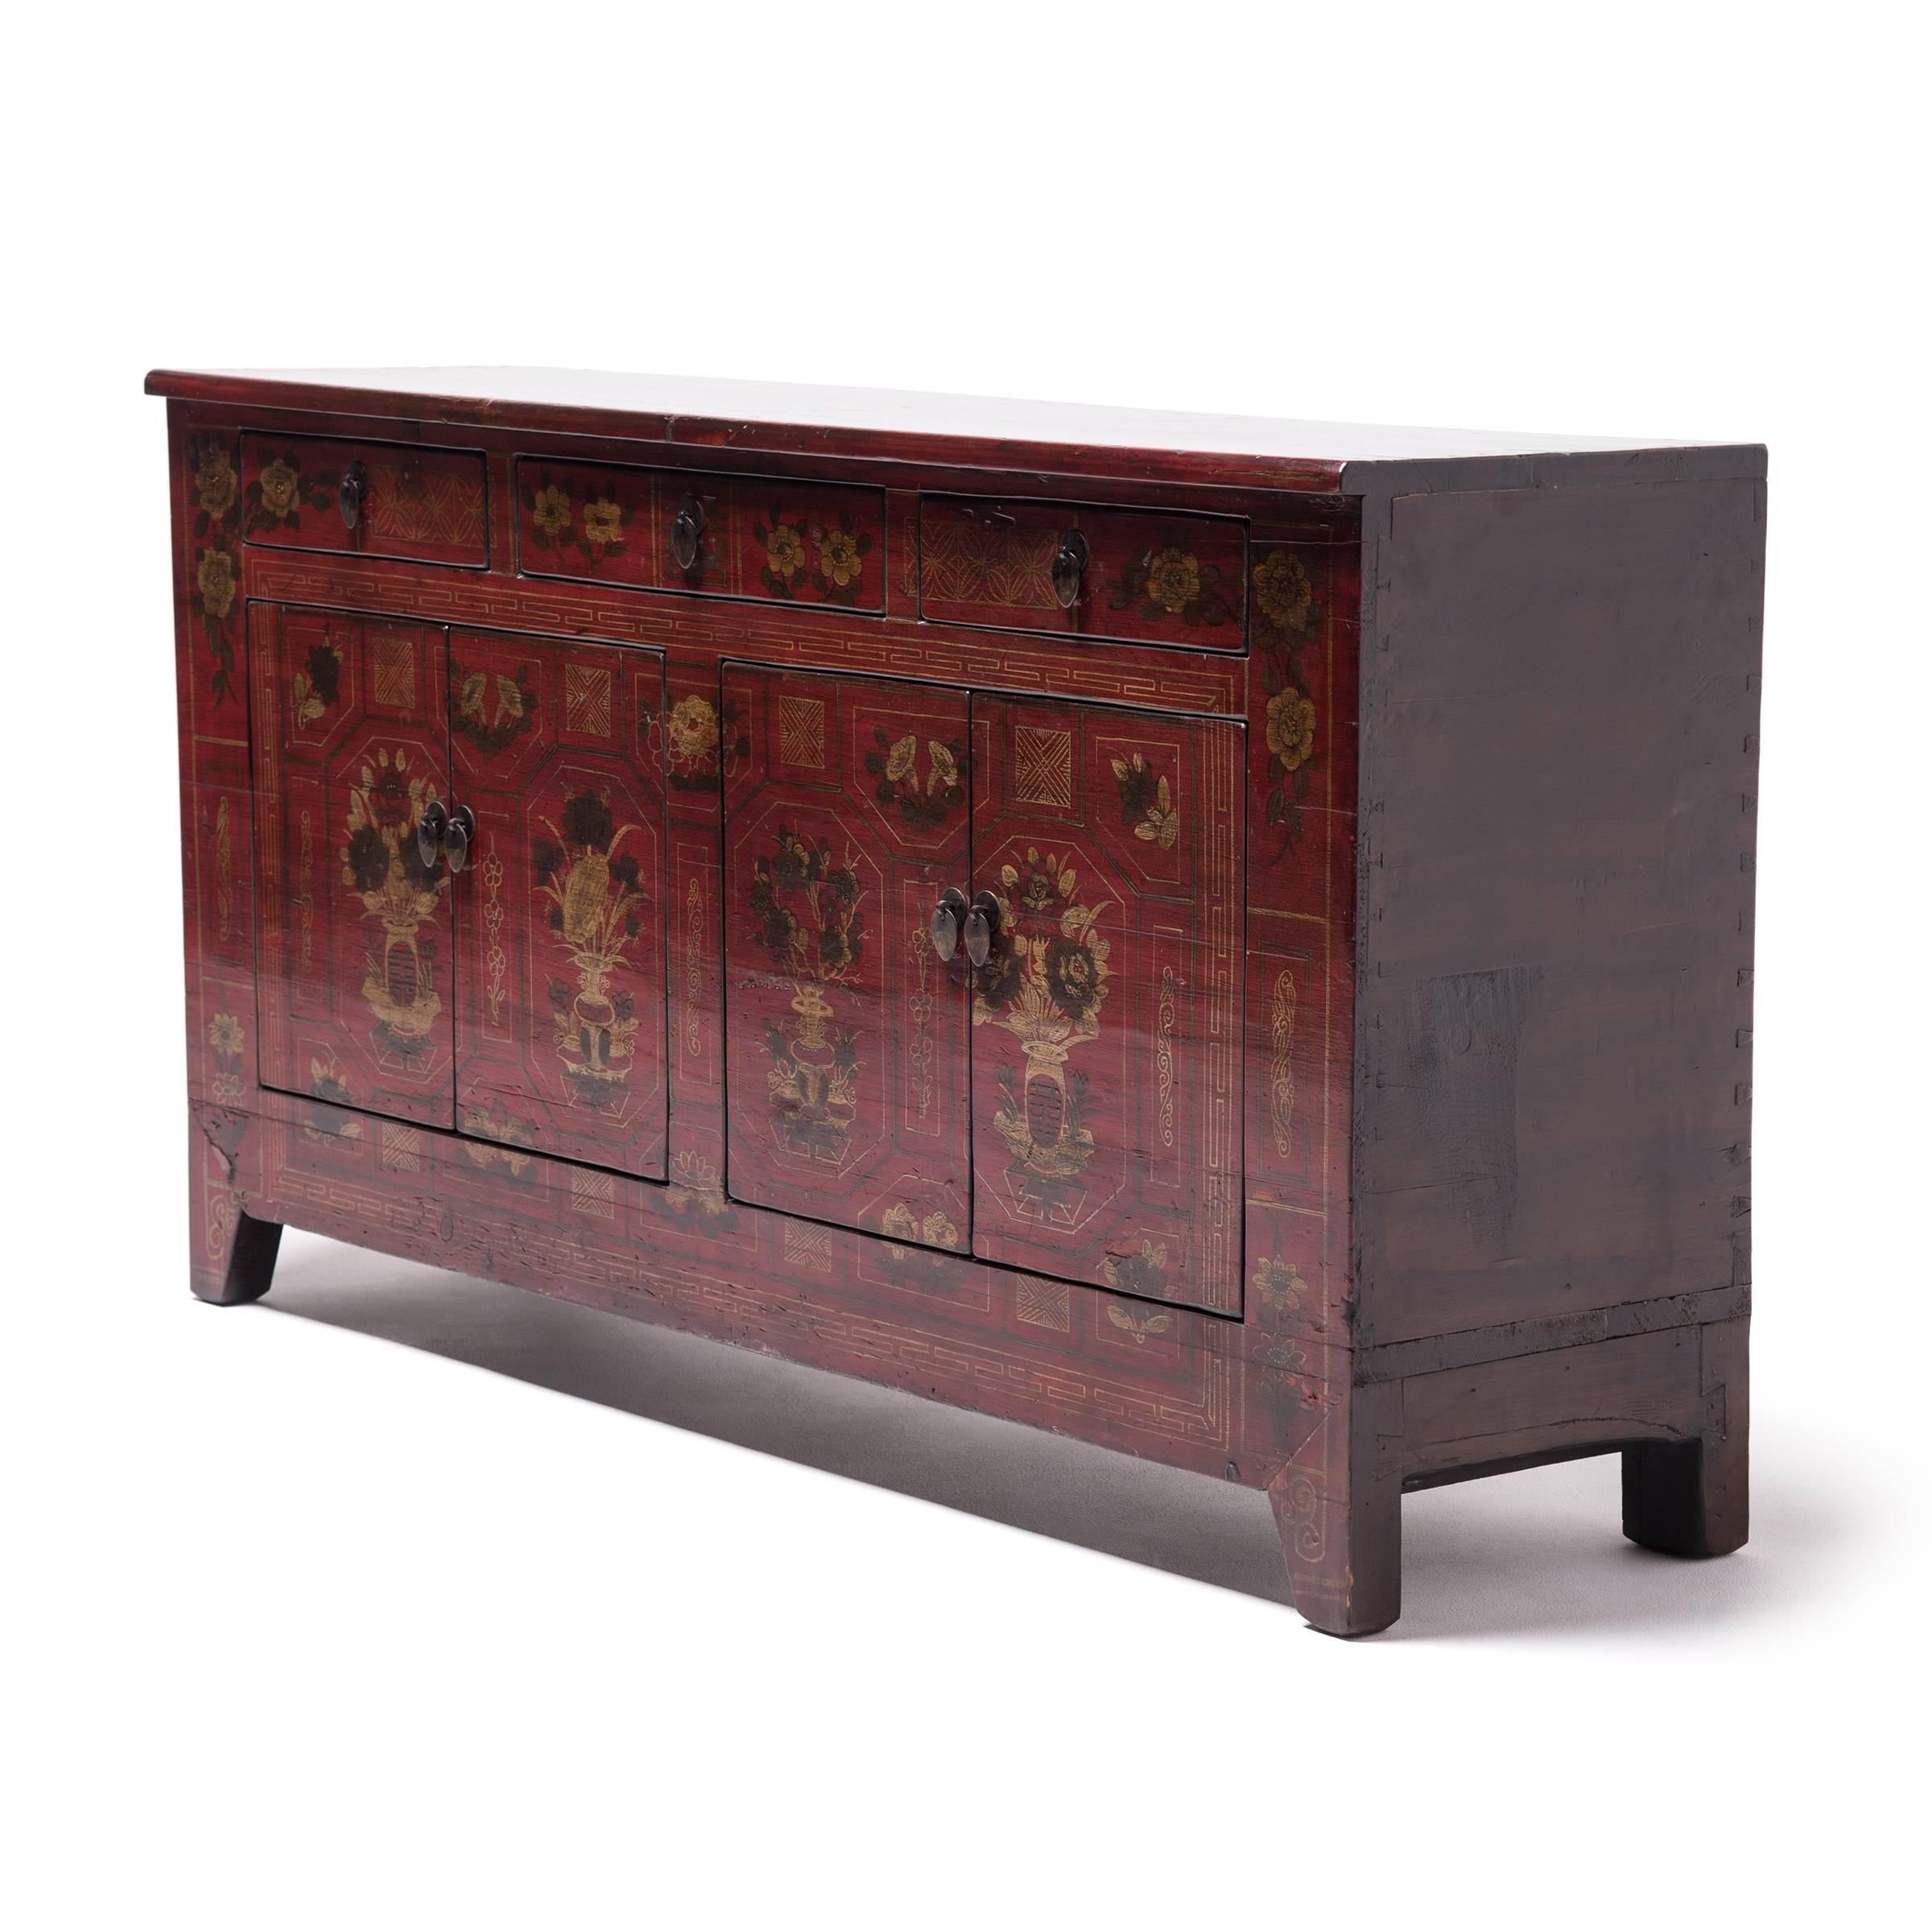 20th Century Mongolian Floral Painted Storage Chest